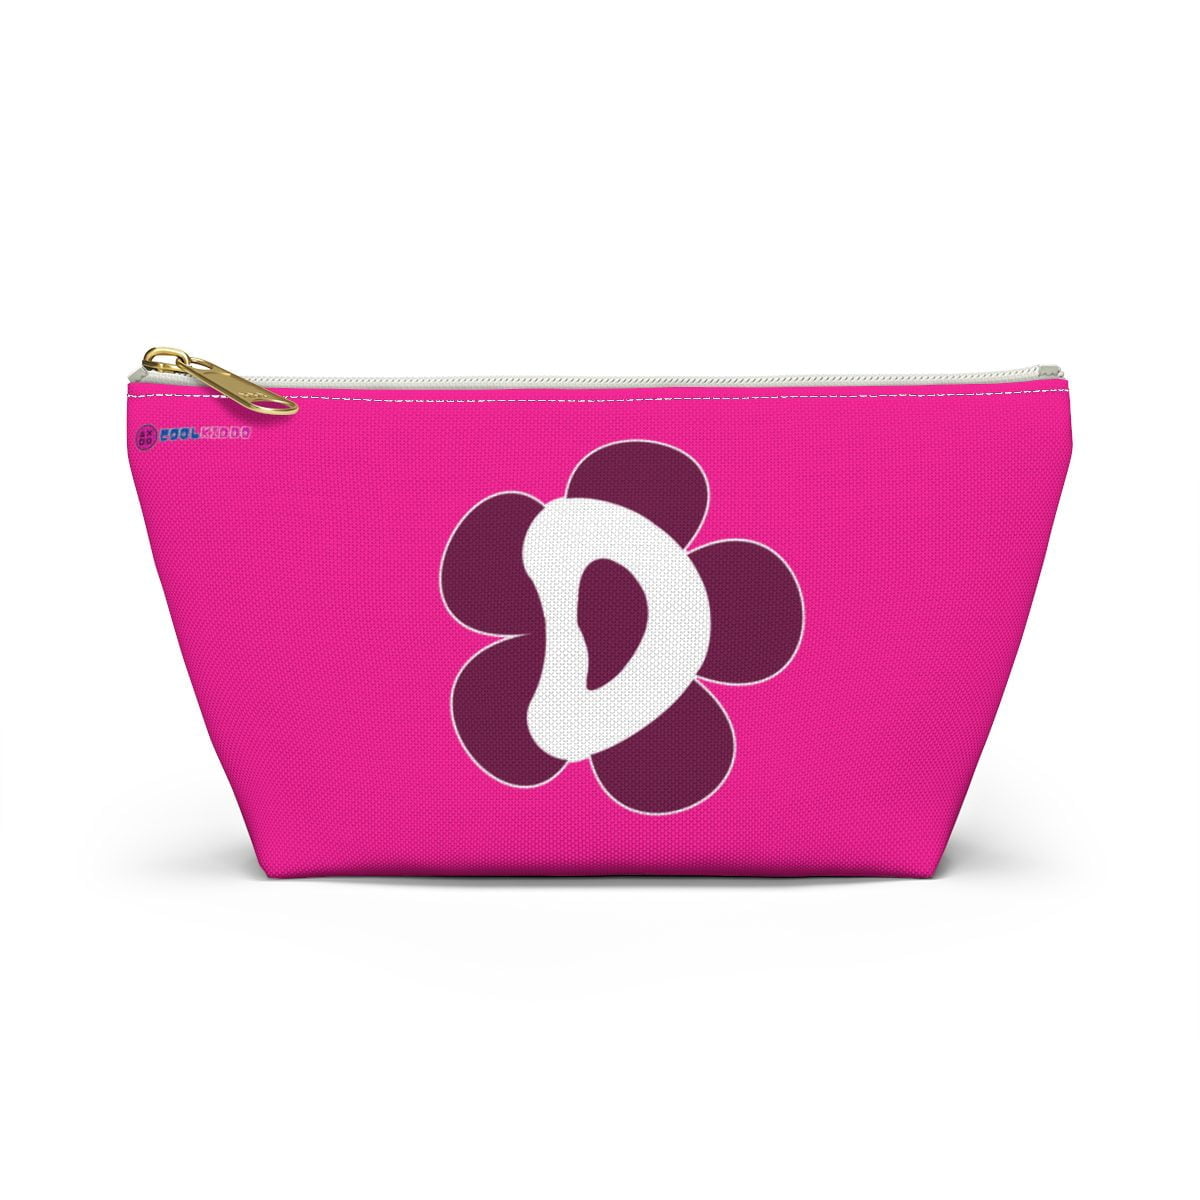 Love Diana Show YouTube Channel Accessory Pouch Cool Kiddo 12